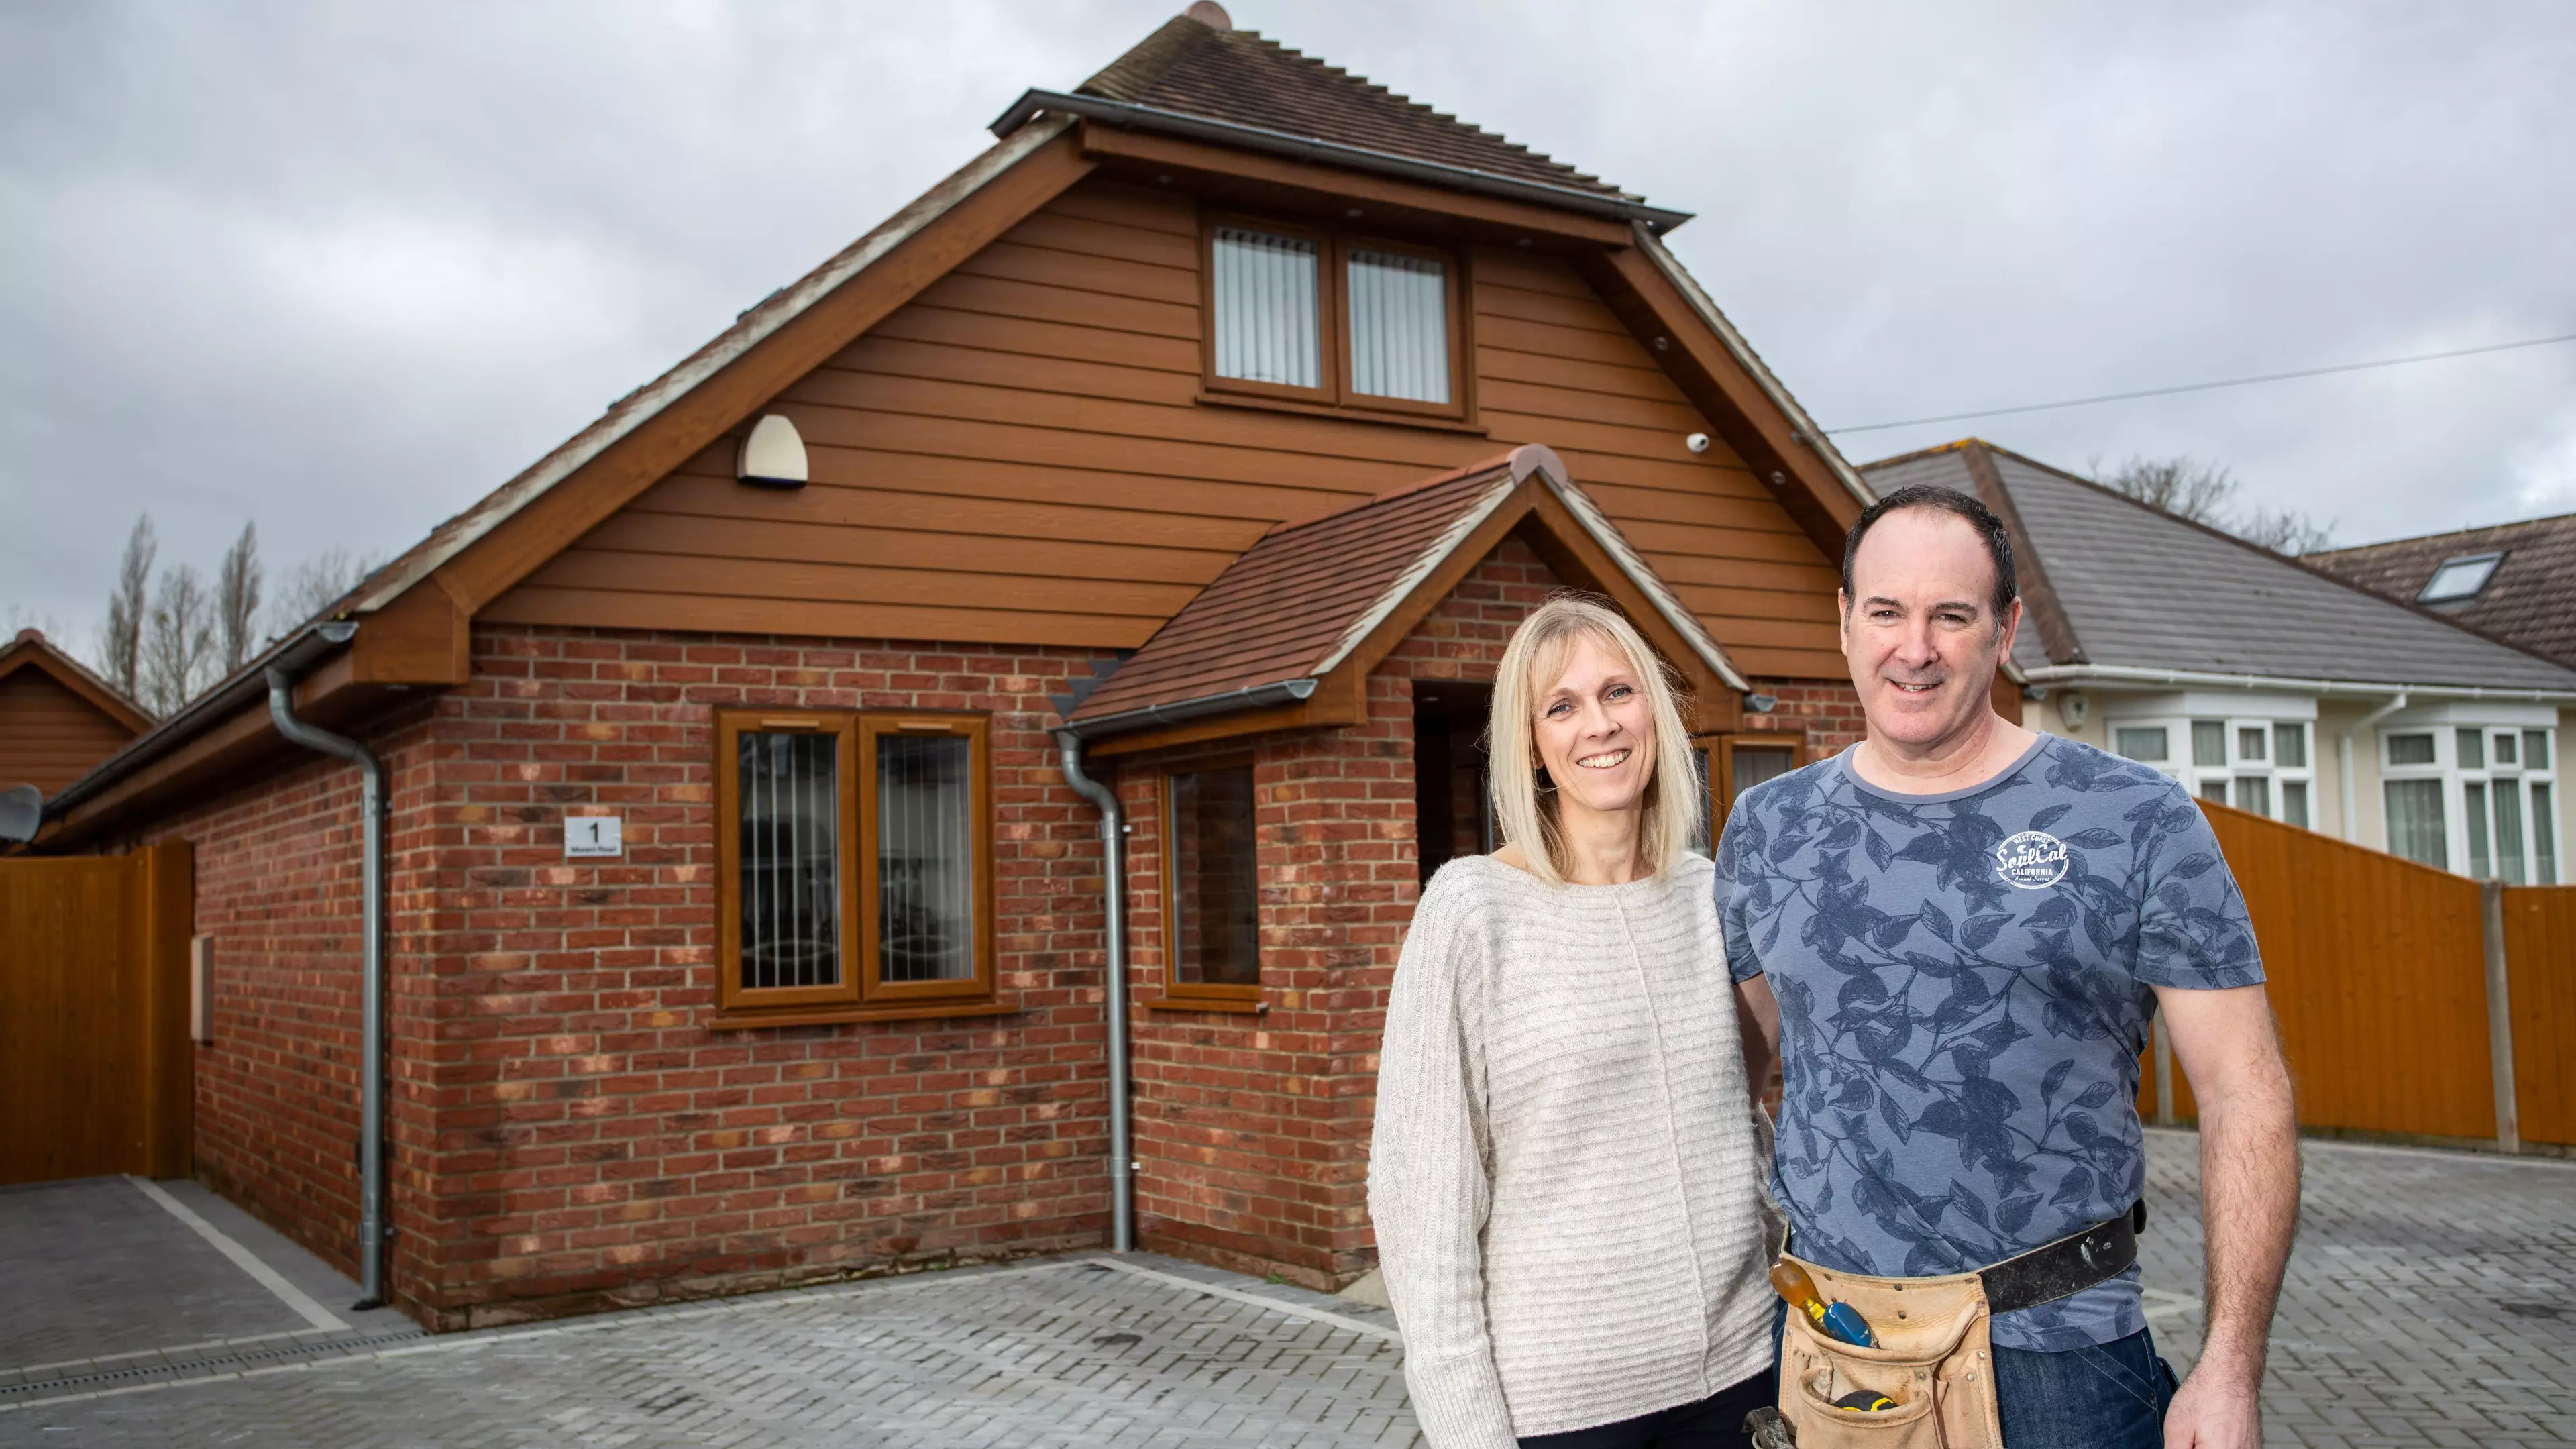 Hampshire Man Builds His Own House For £140,000 Using YouTube Videos